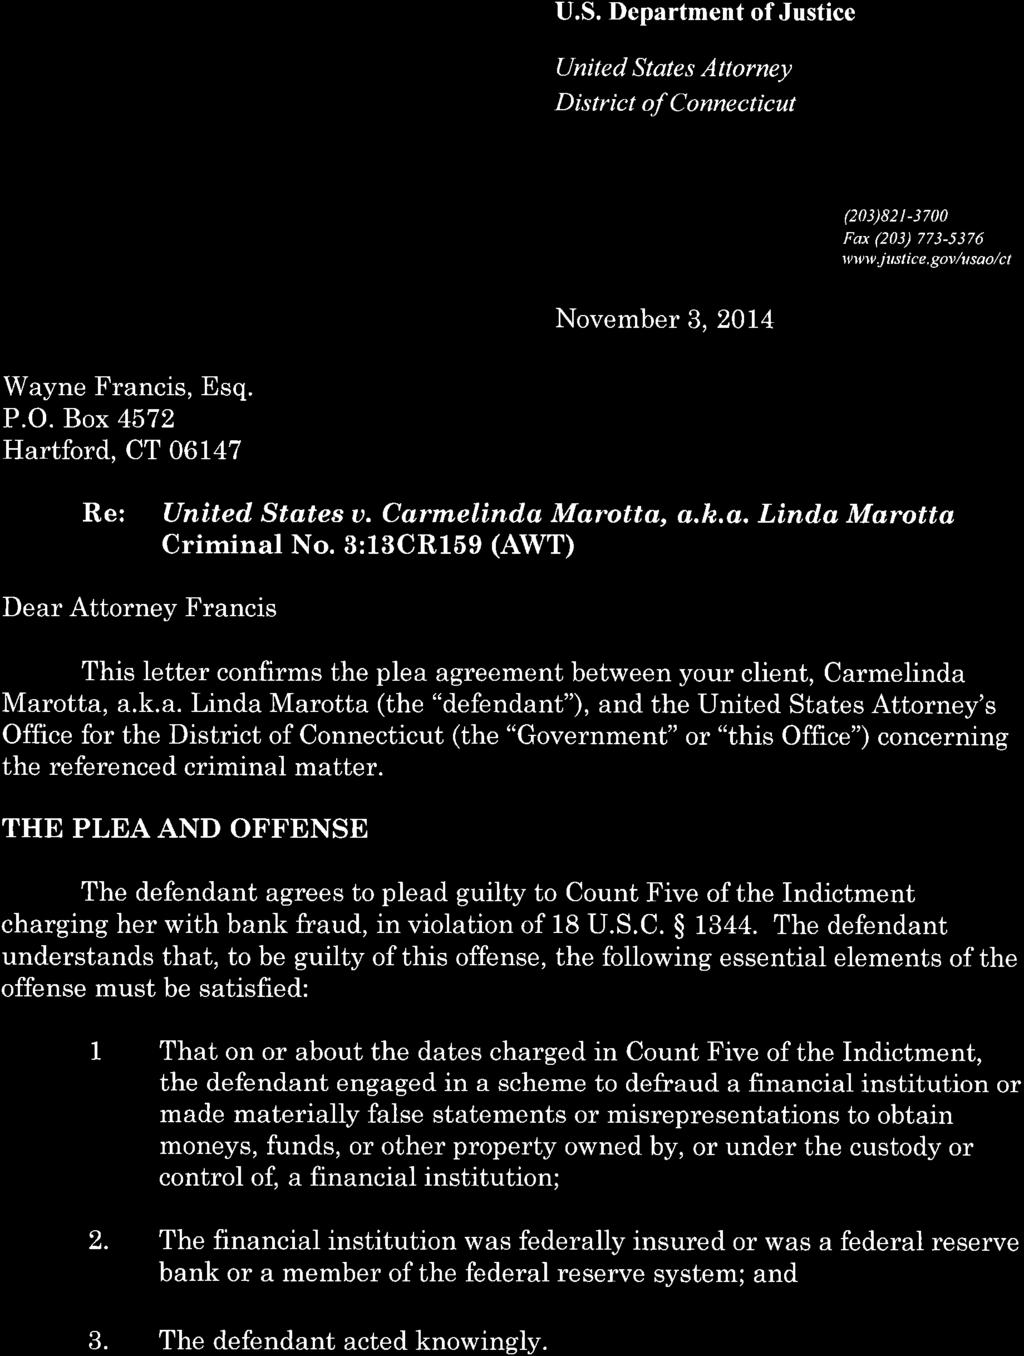 Case 3:13-cr-00159-AWT Document 184 Filed 11/03/14 Page 1 of 14 U.S.